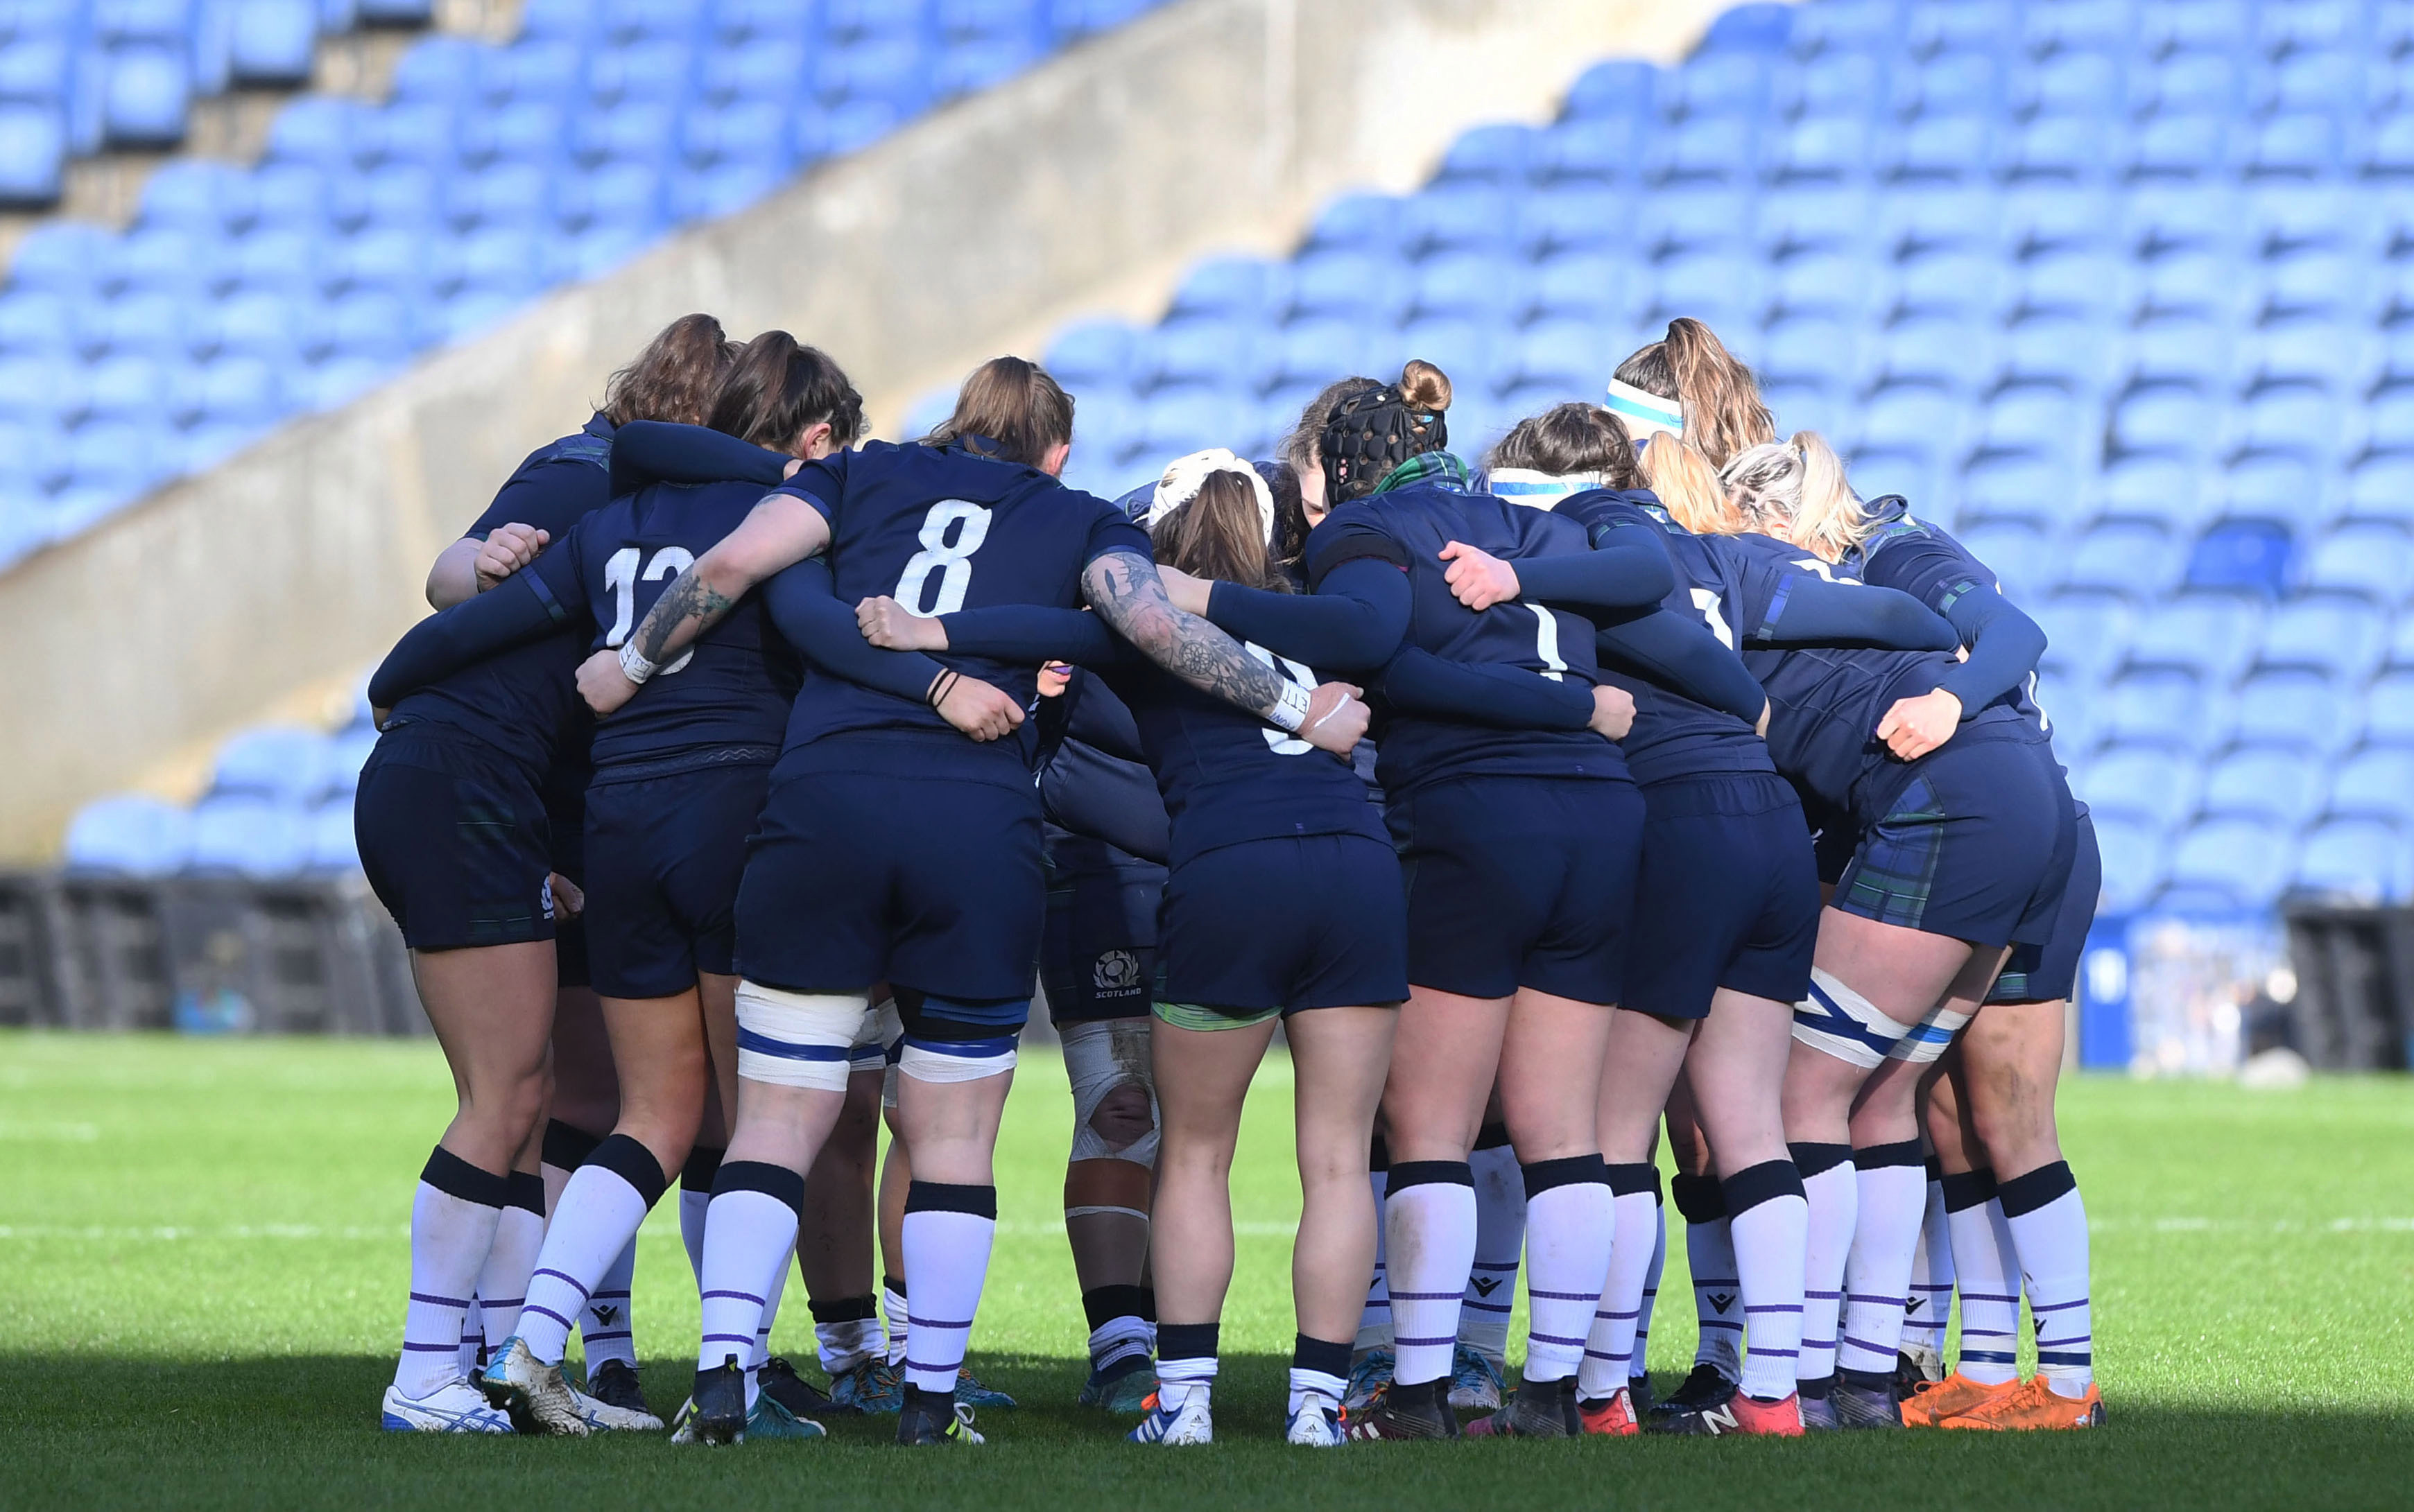 Scottish Female Rugby Player Tests Positive For COVID-19